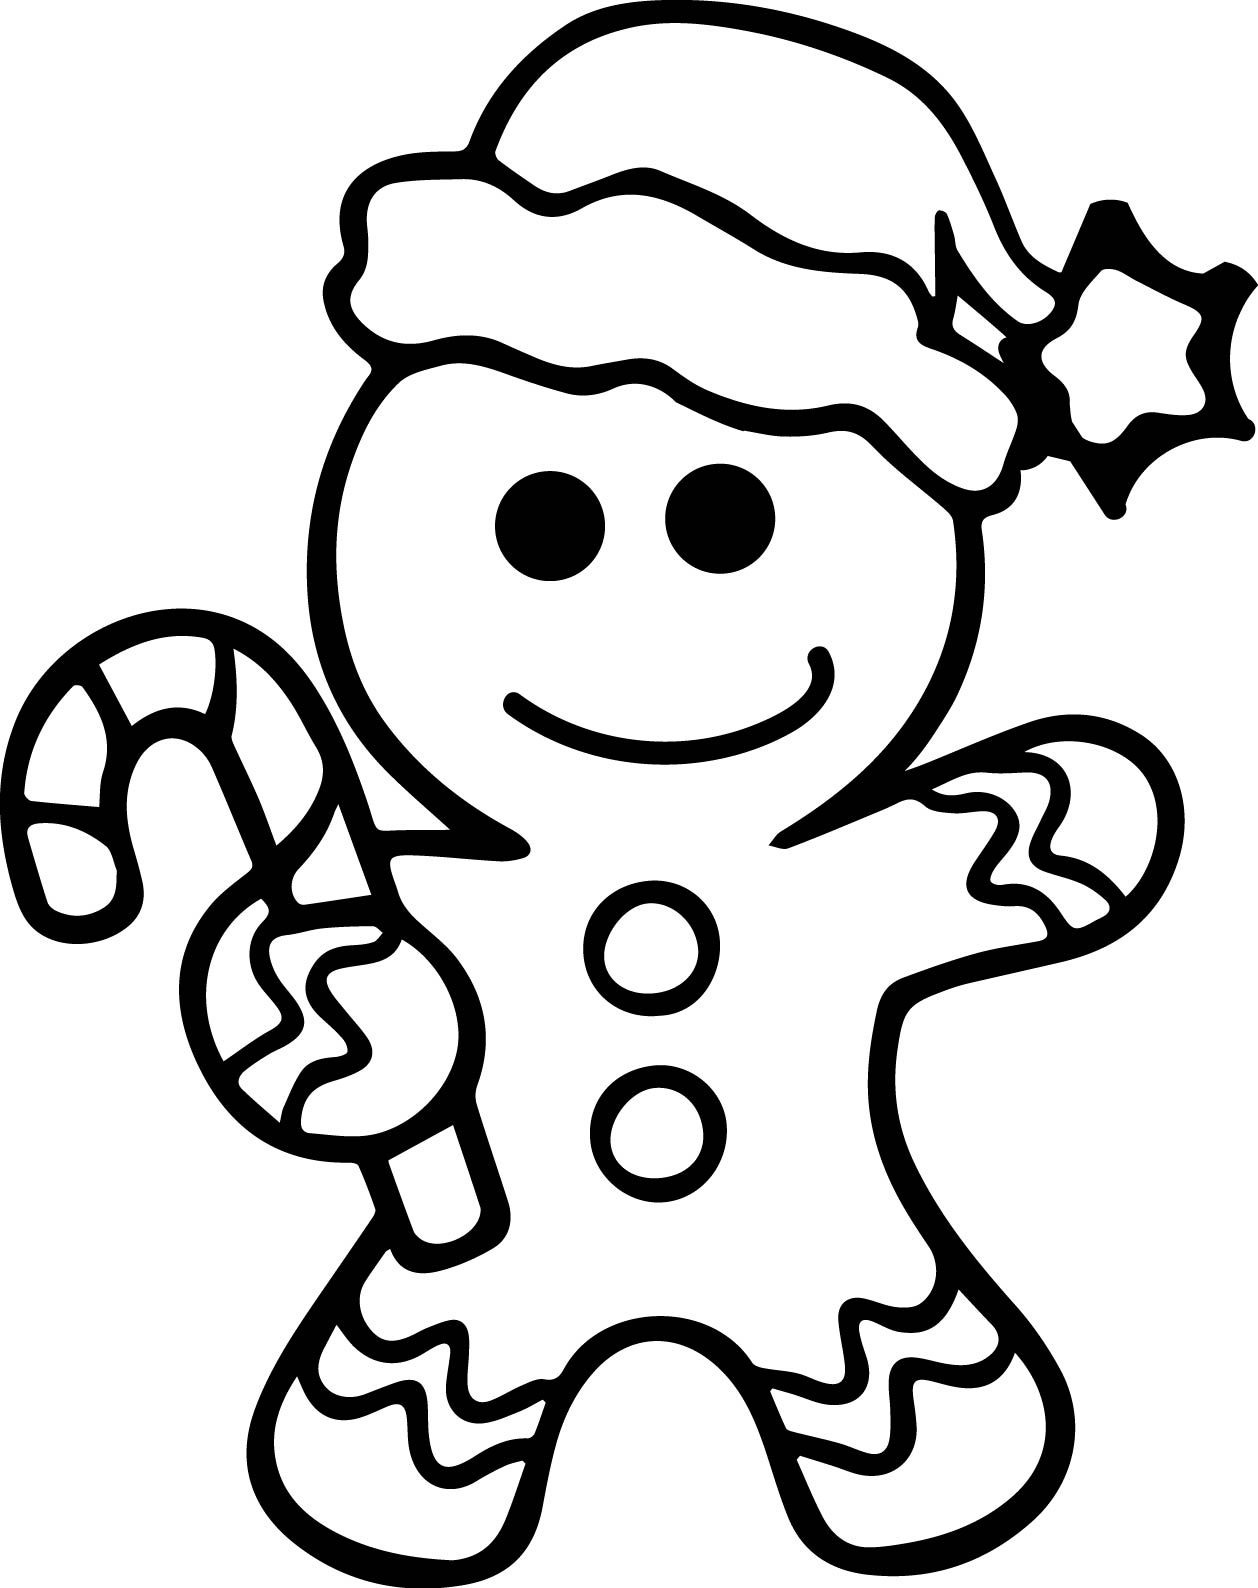 gingerbread-man-outline-free-download-on-clipartmag